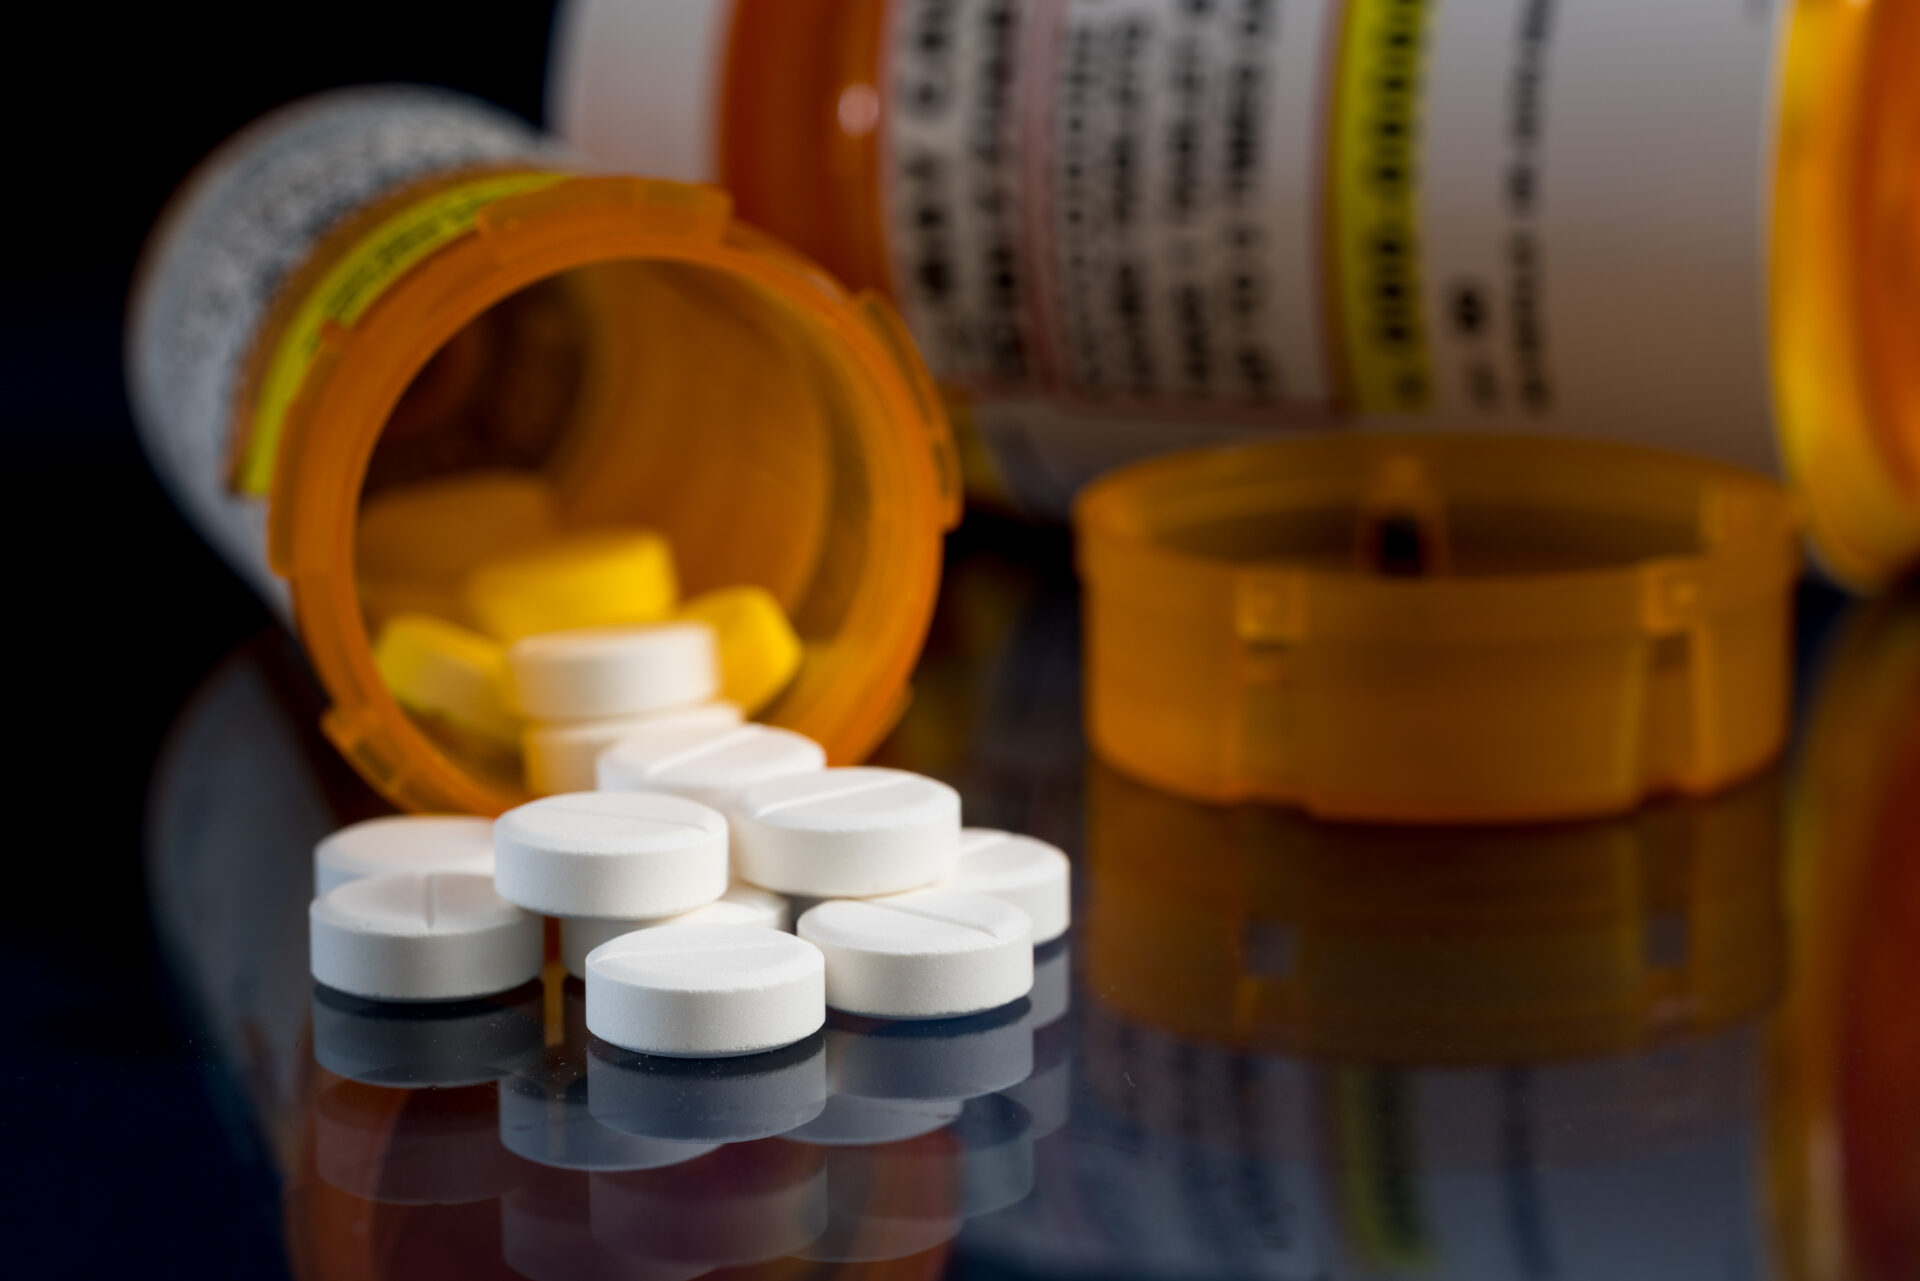 Most opioid addictions are formed while taking prescription medication